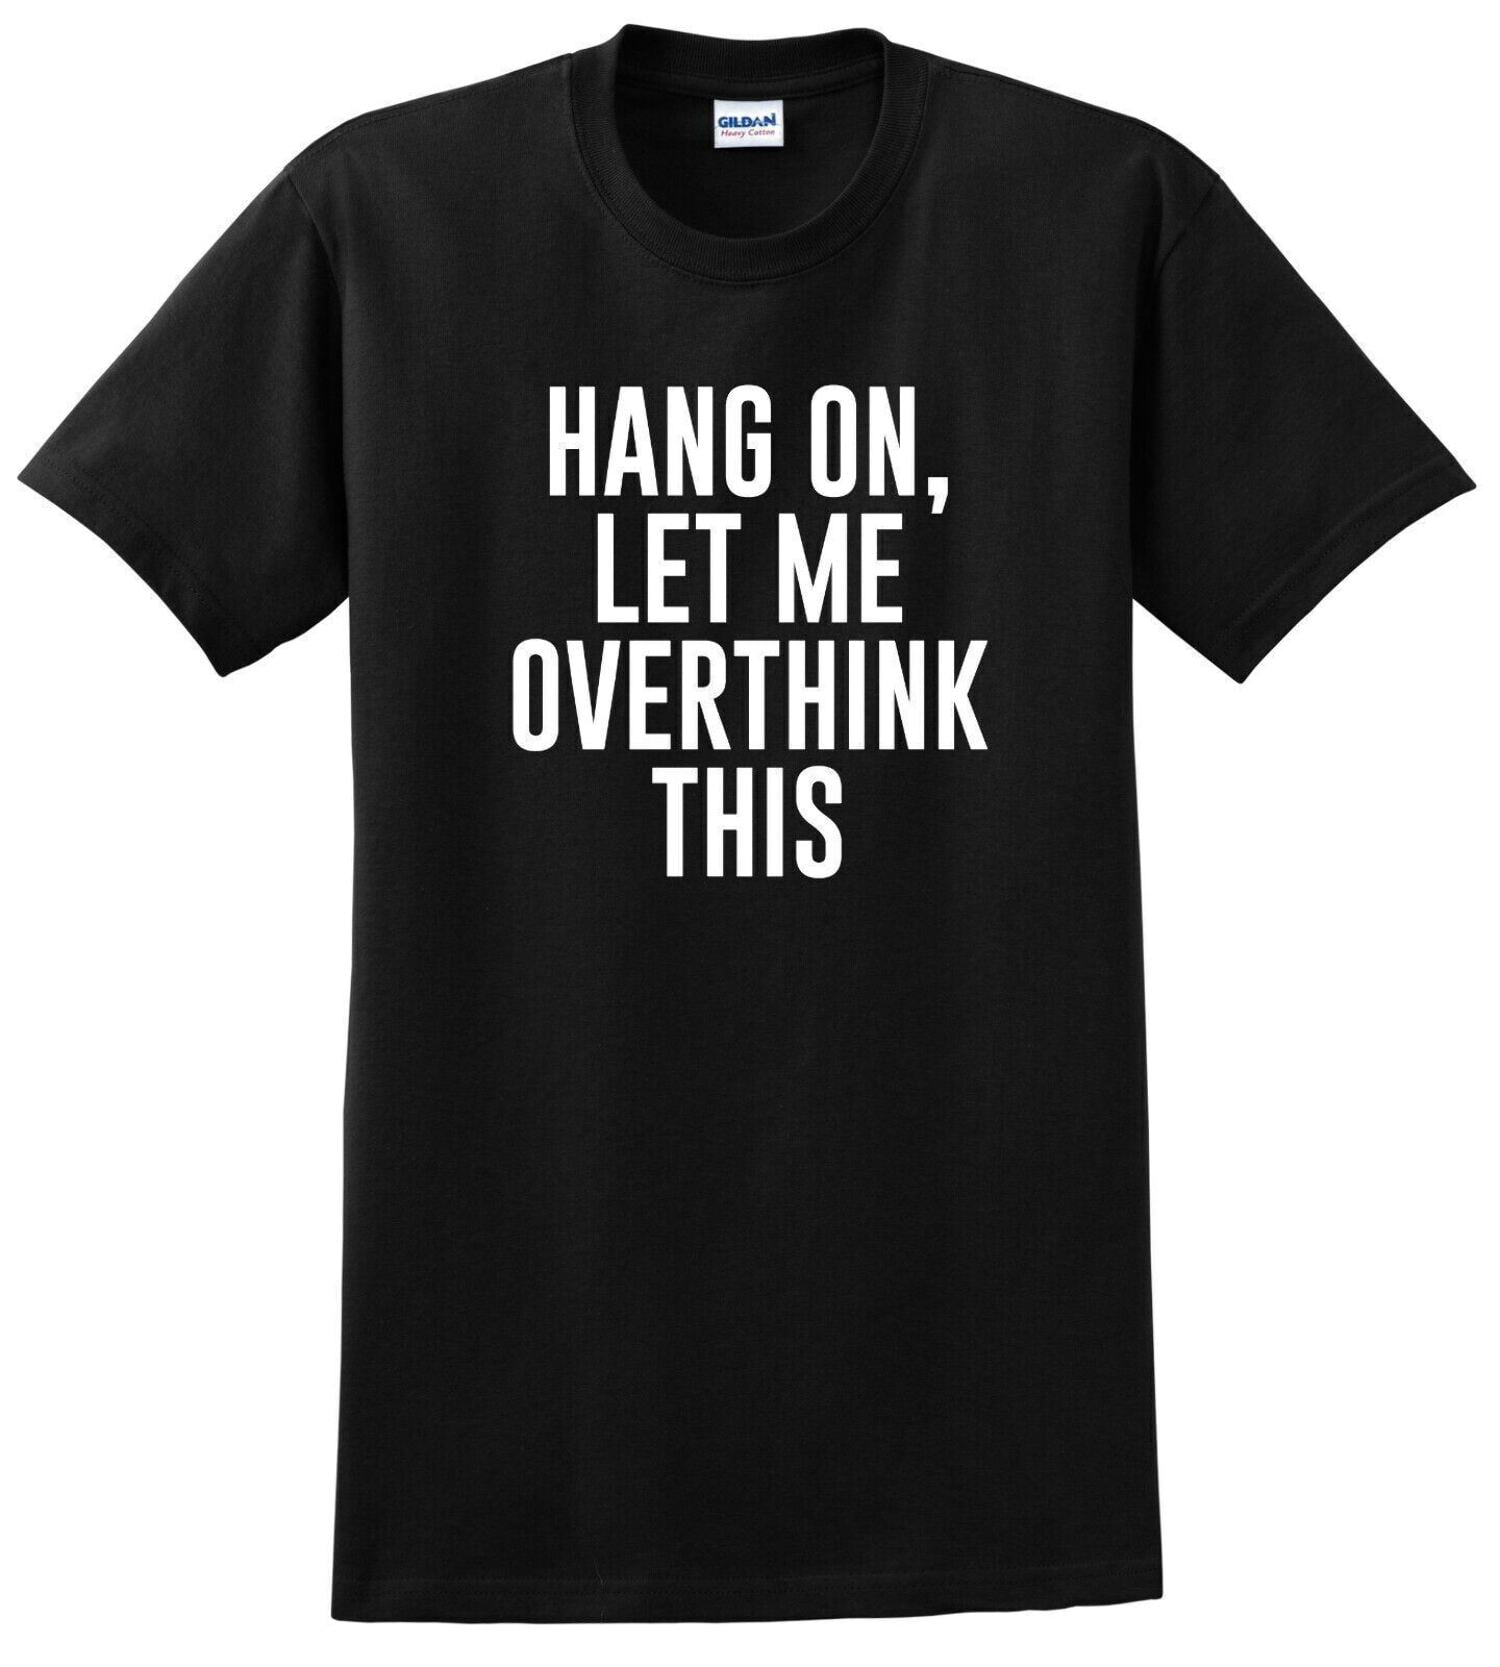 Hold On Let Me Overthink On This - Funny Sarcastic Humor Men's T-Shirt ...